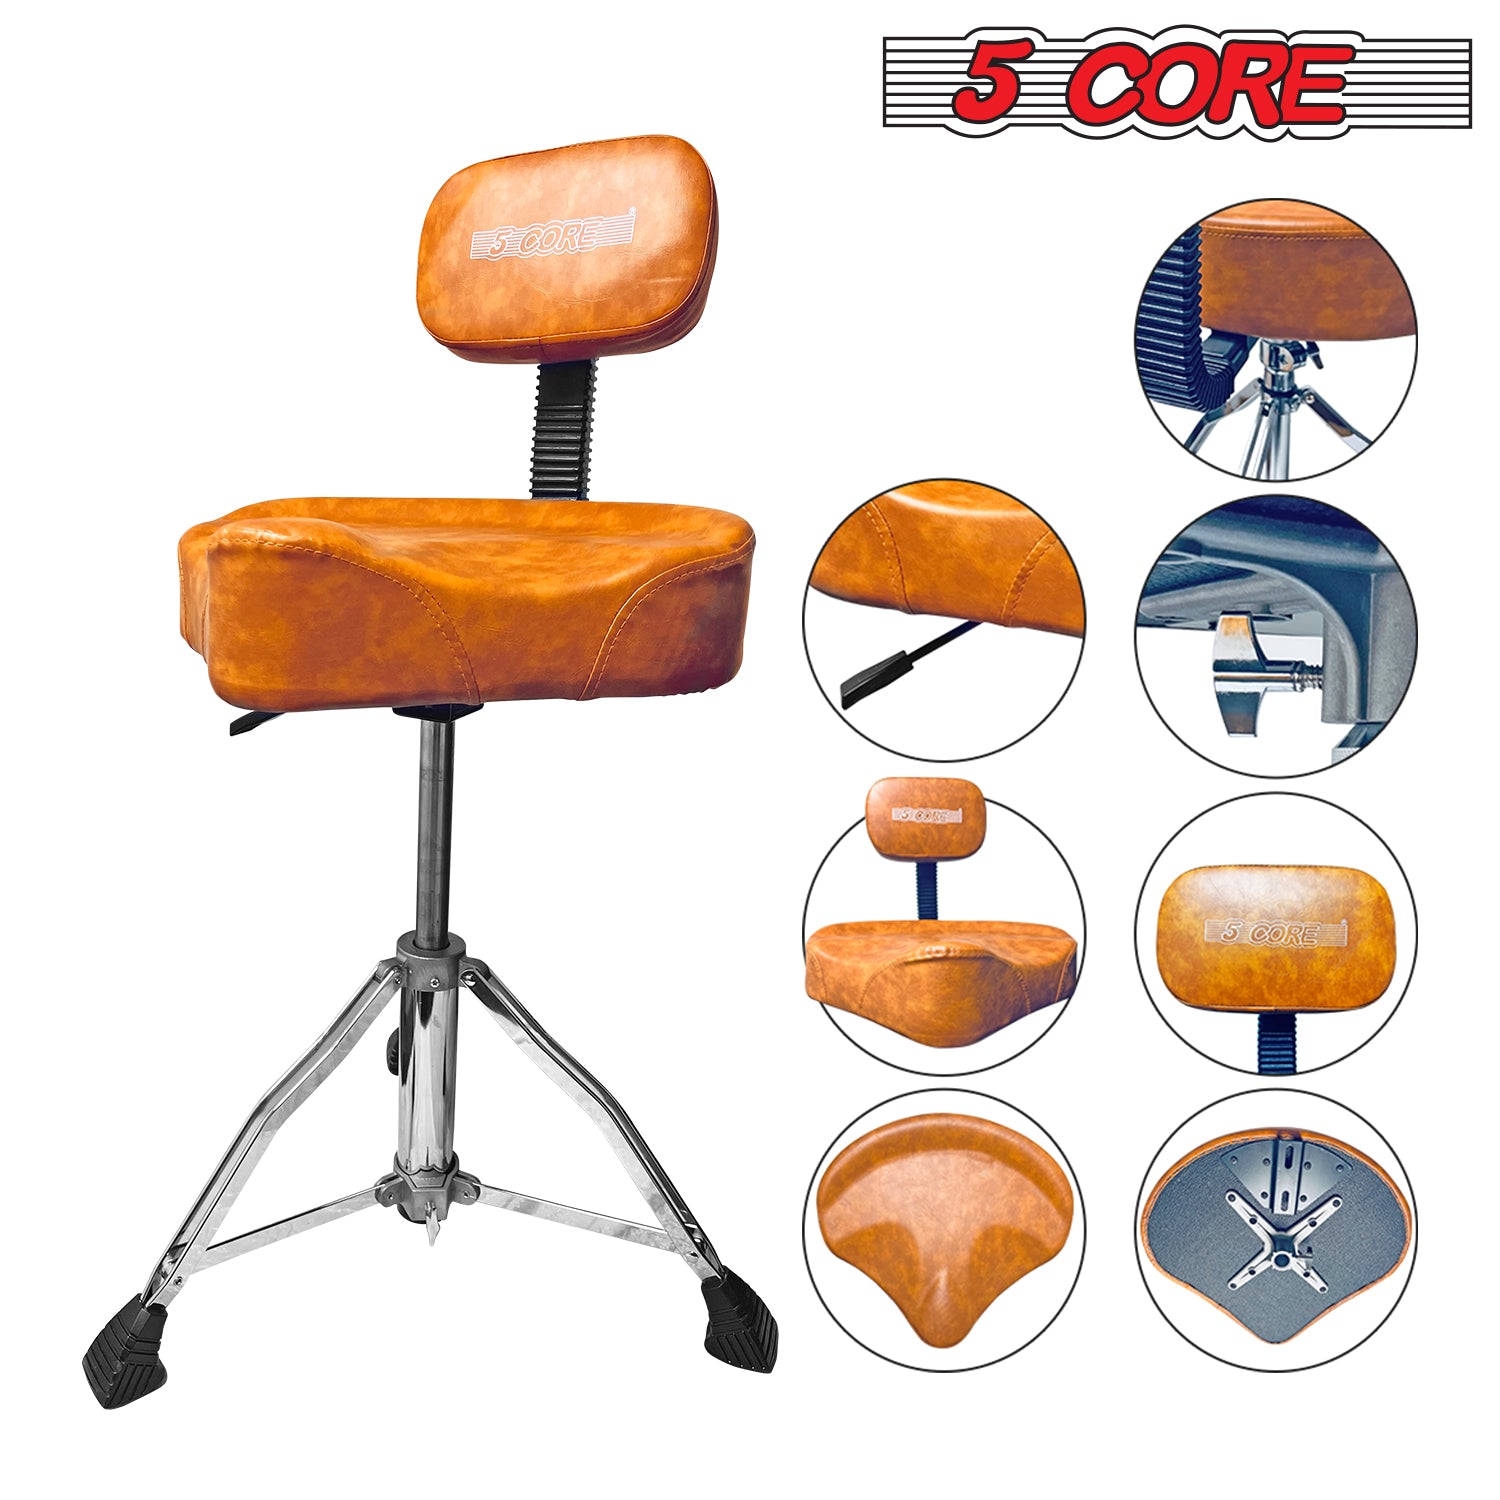 5 CORE Brown Drum Throne with Backrest Hydraulic Adjustable